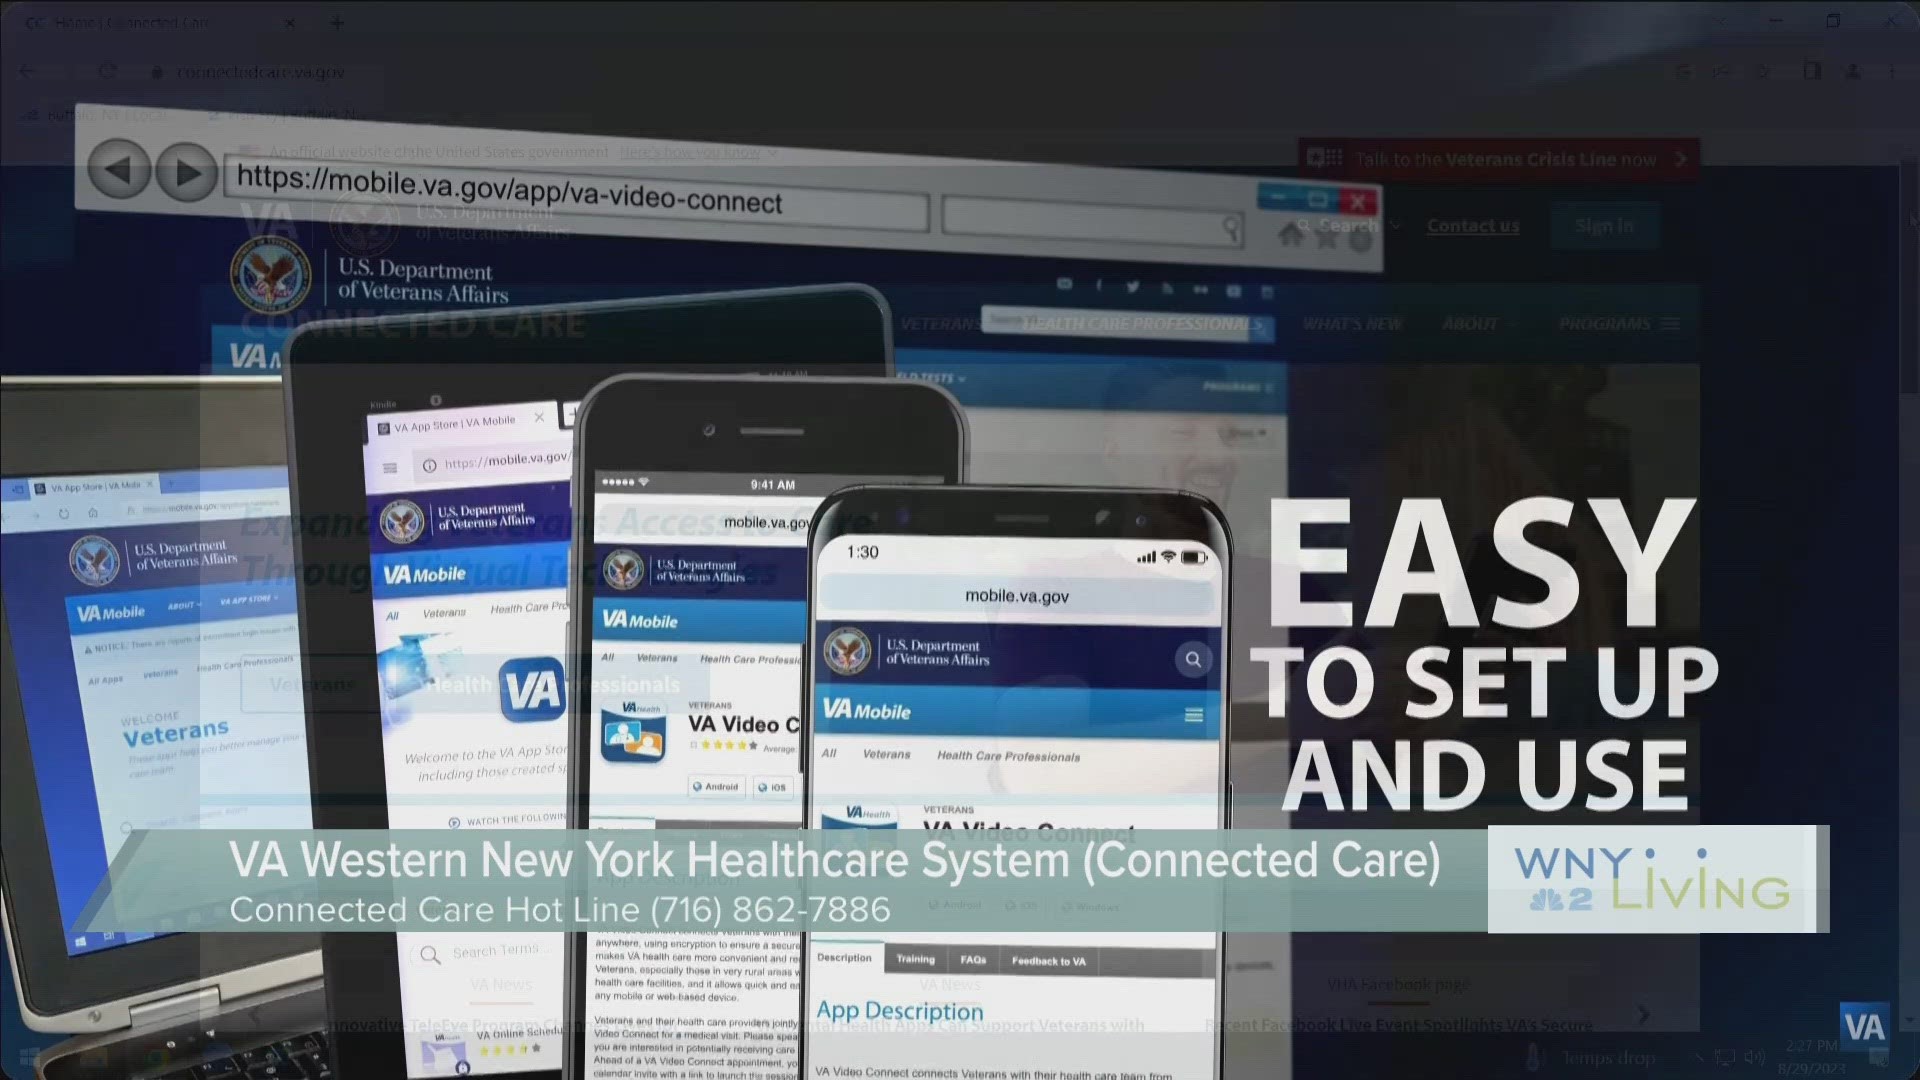 Sept. 2nd - VA WNY Healthcare System (THIS VIDEO IS SPONSORED BY VA WNY HEALTHCARE SYSTEM)